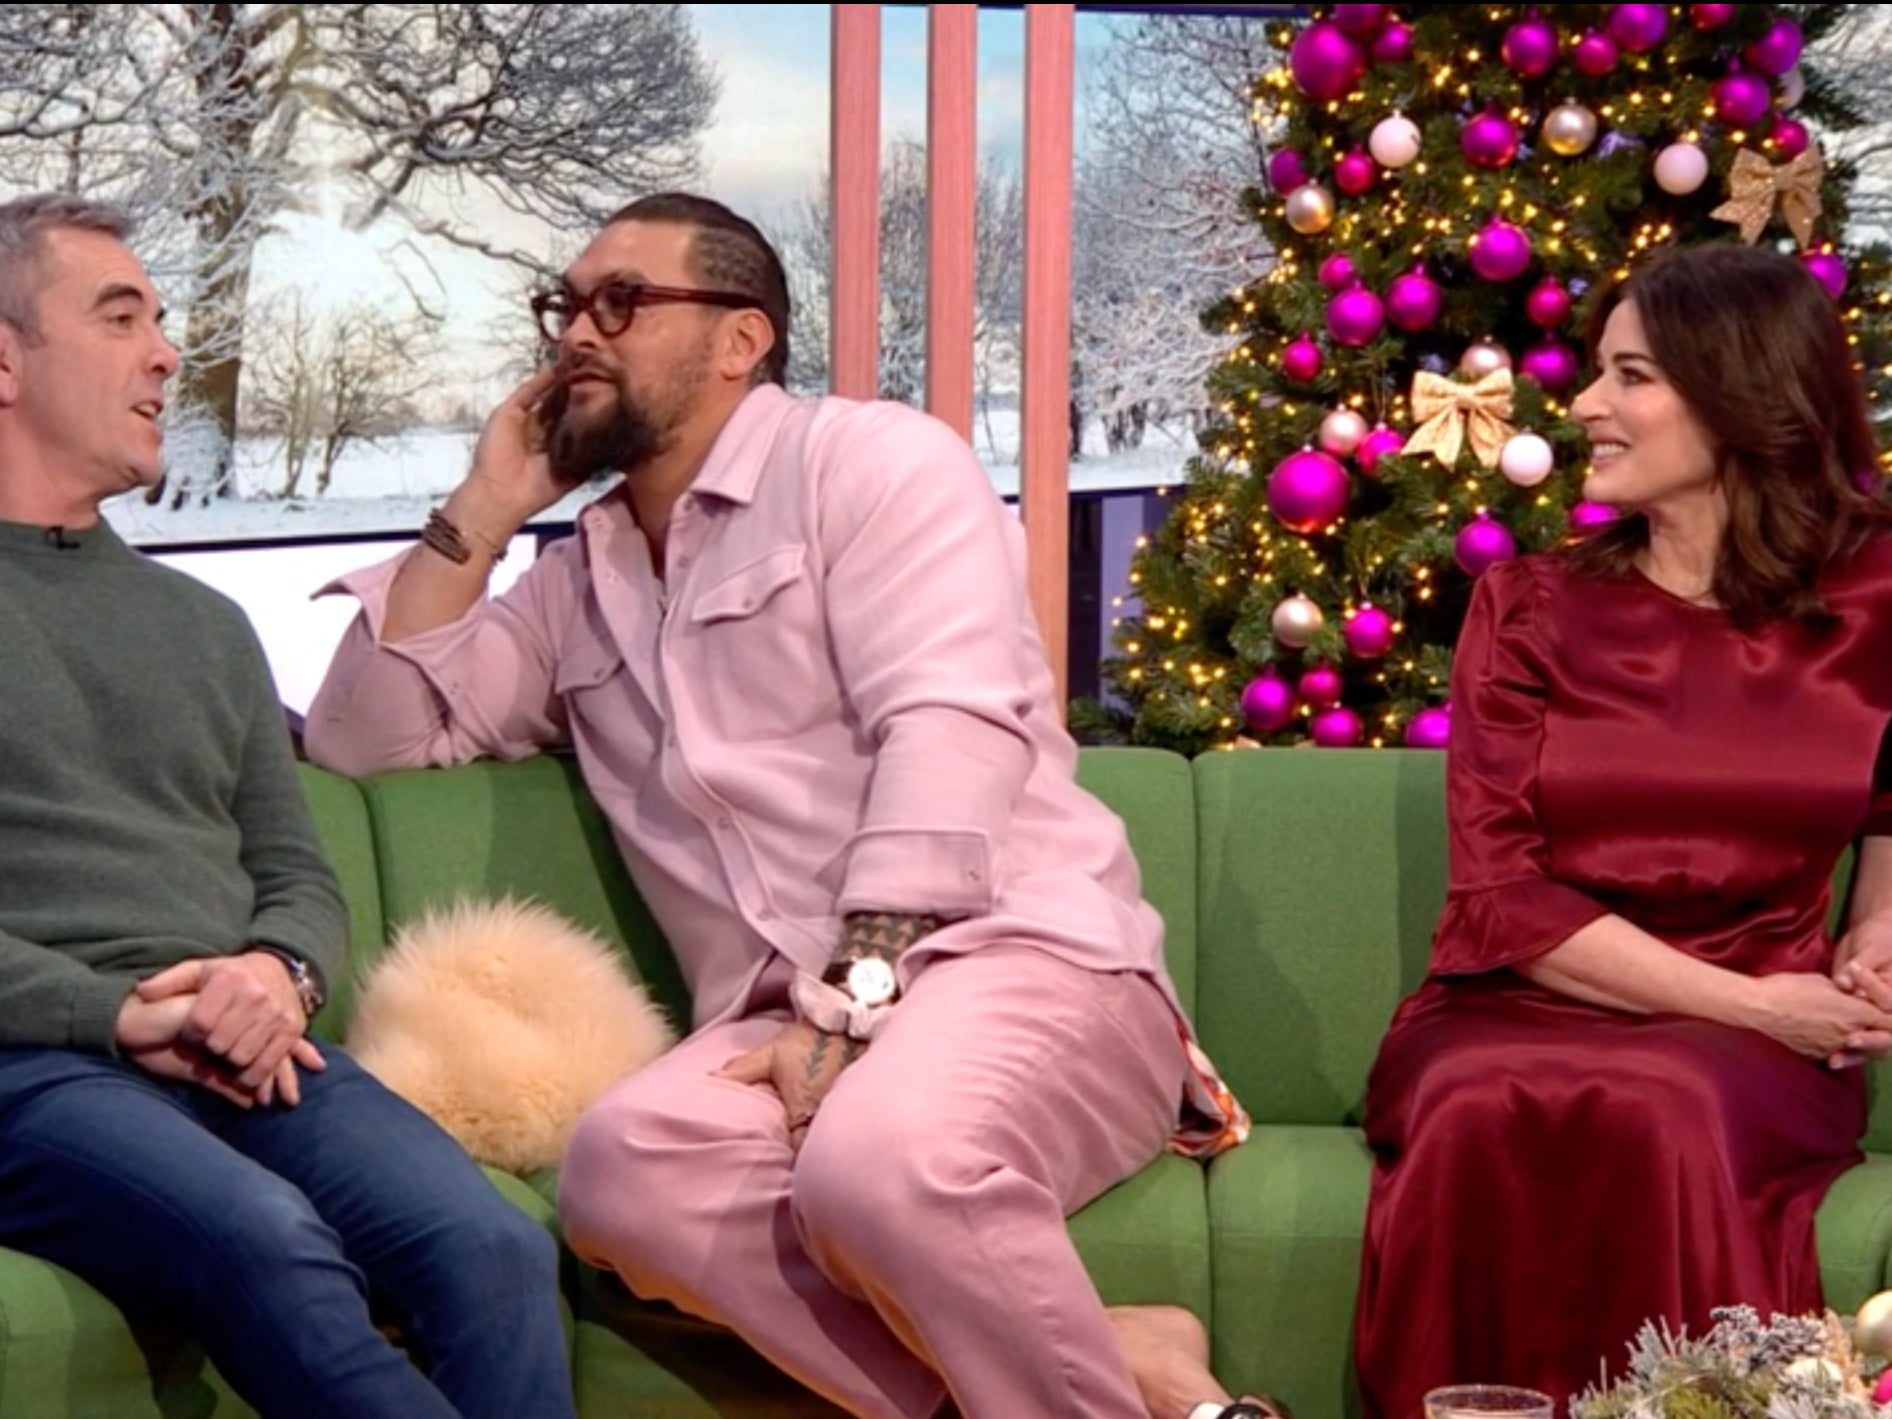 Frozen out: Nigella Lawson maintains her poise as actor Jason Momoa turns his back on her on The One Show sofa